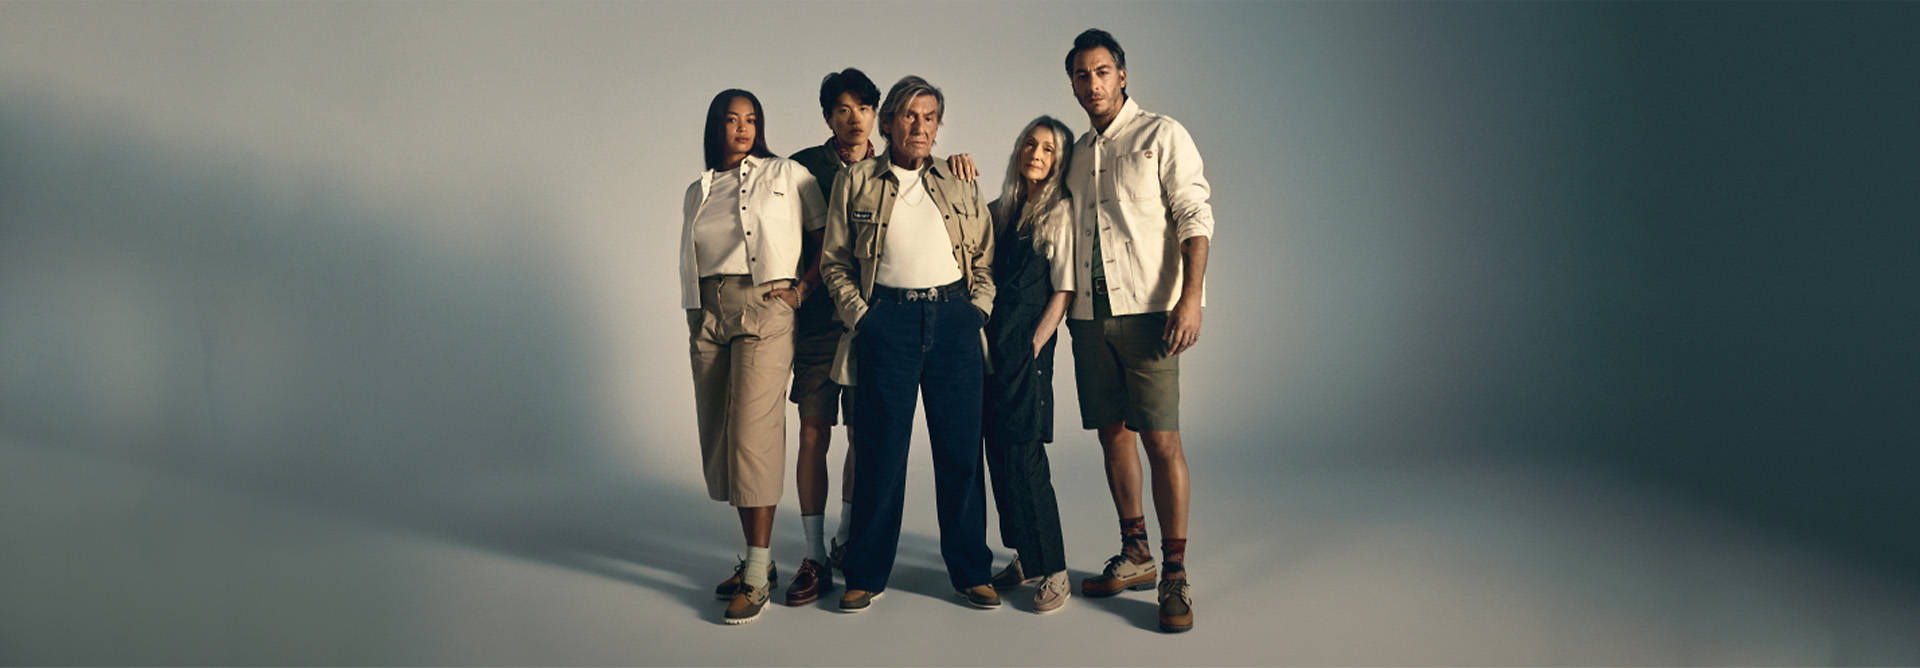 Image of five people of all ages and ethnicities, standing in muted clothing and Timberland boat shoes, facing the camera. Background is a blurred, darkened white room.